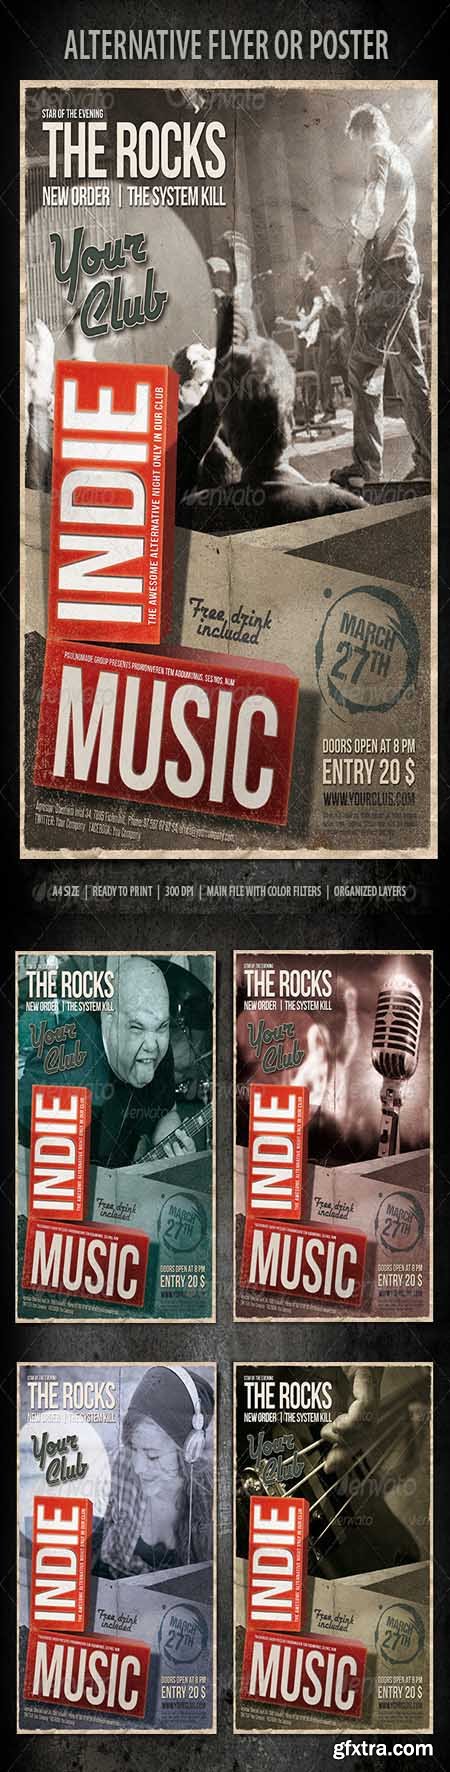 GraphicRiver Indie Music Flyer 6965550